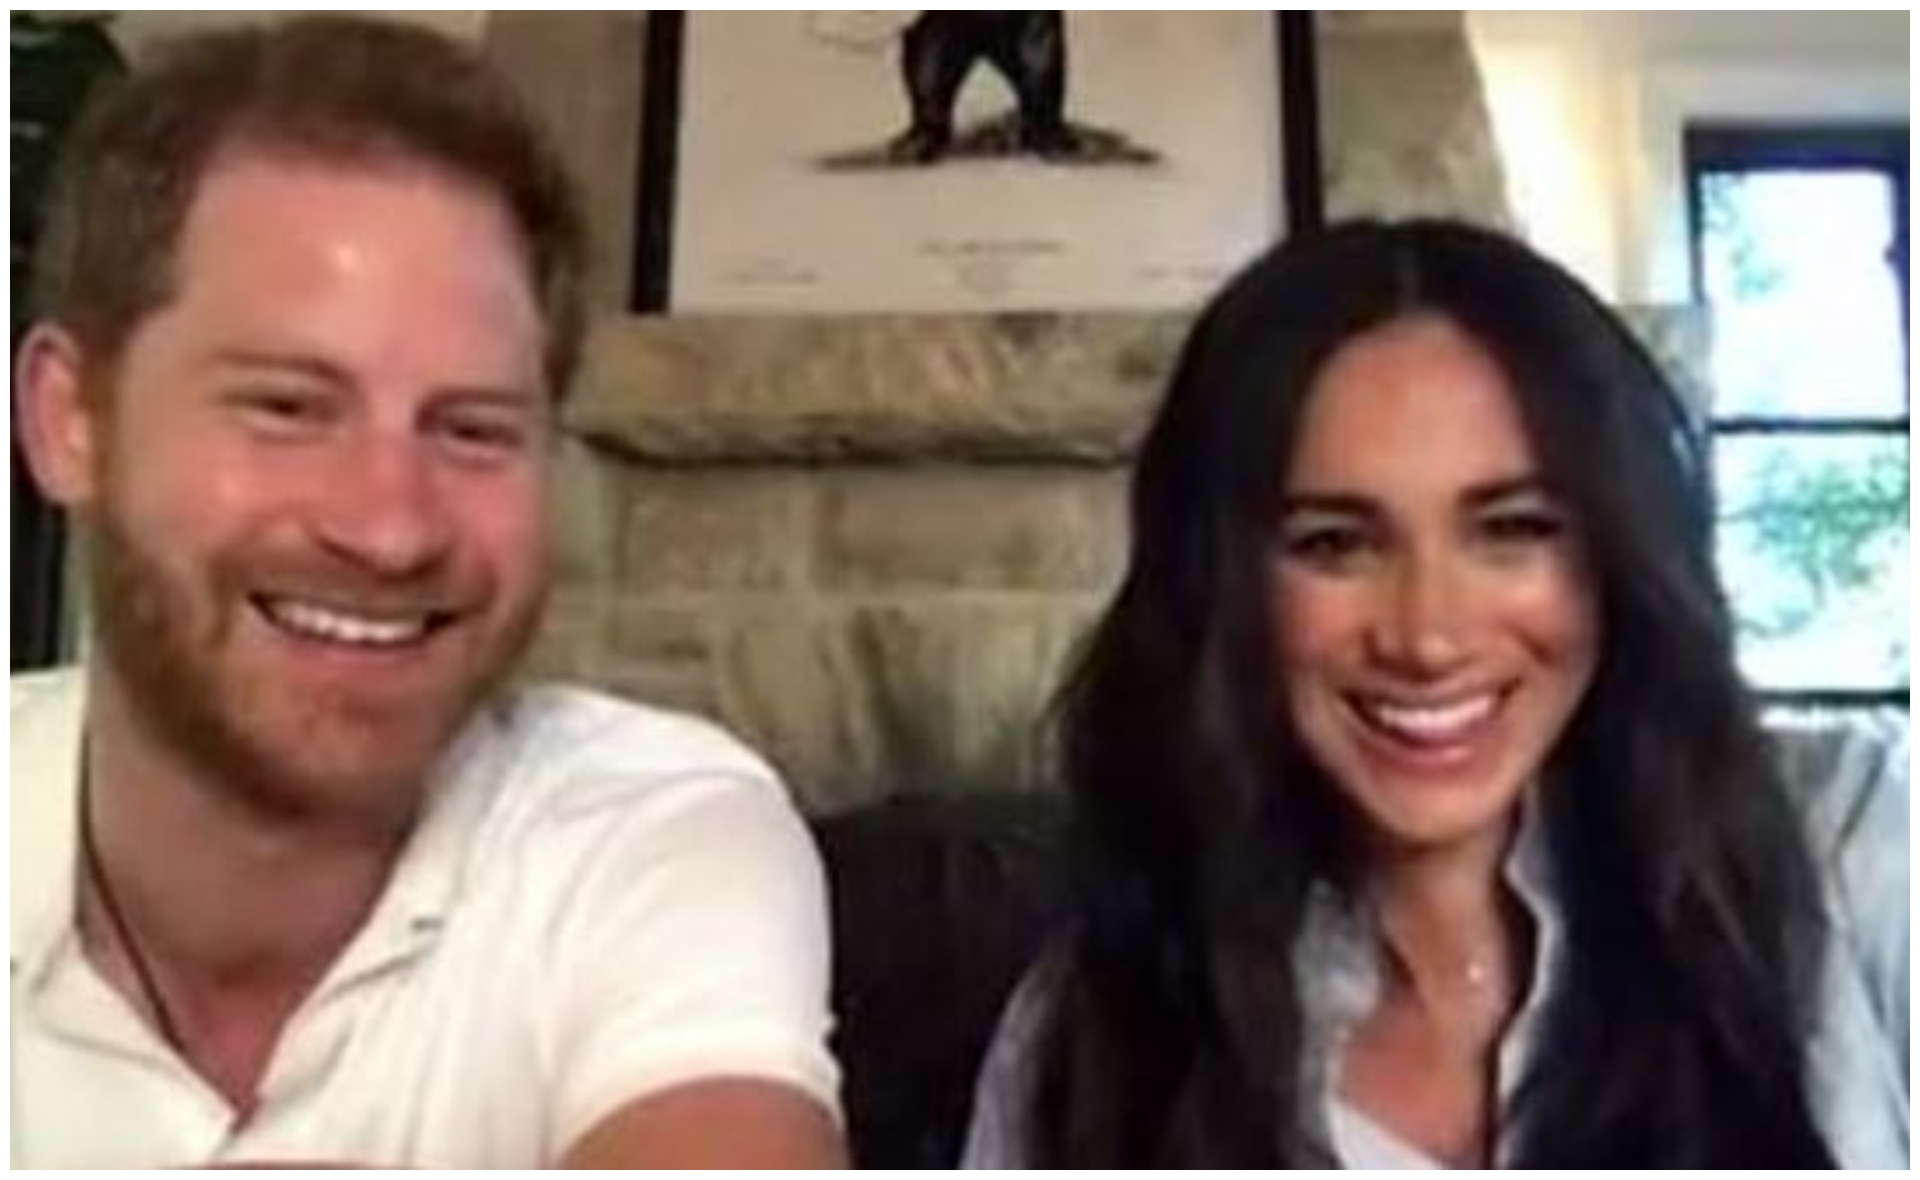 Duchess Meghan’s Zoom name is brilliantly apt as she and Prince Harry crash an unexpected video call